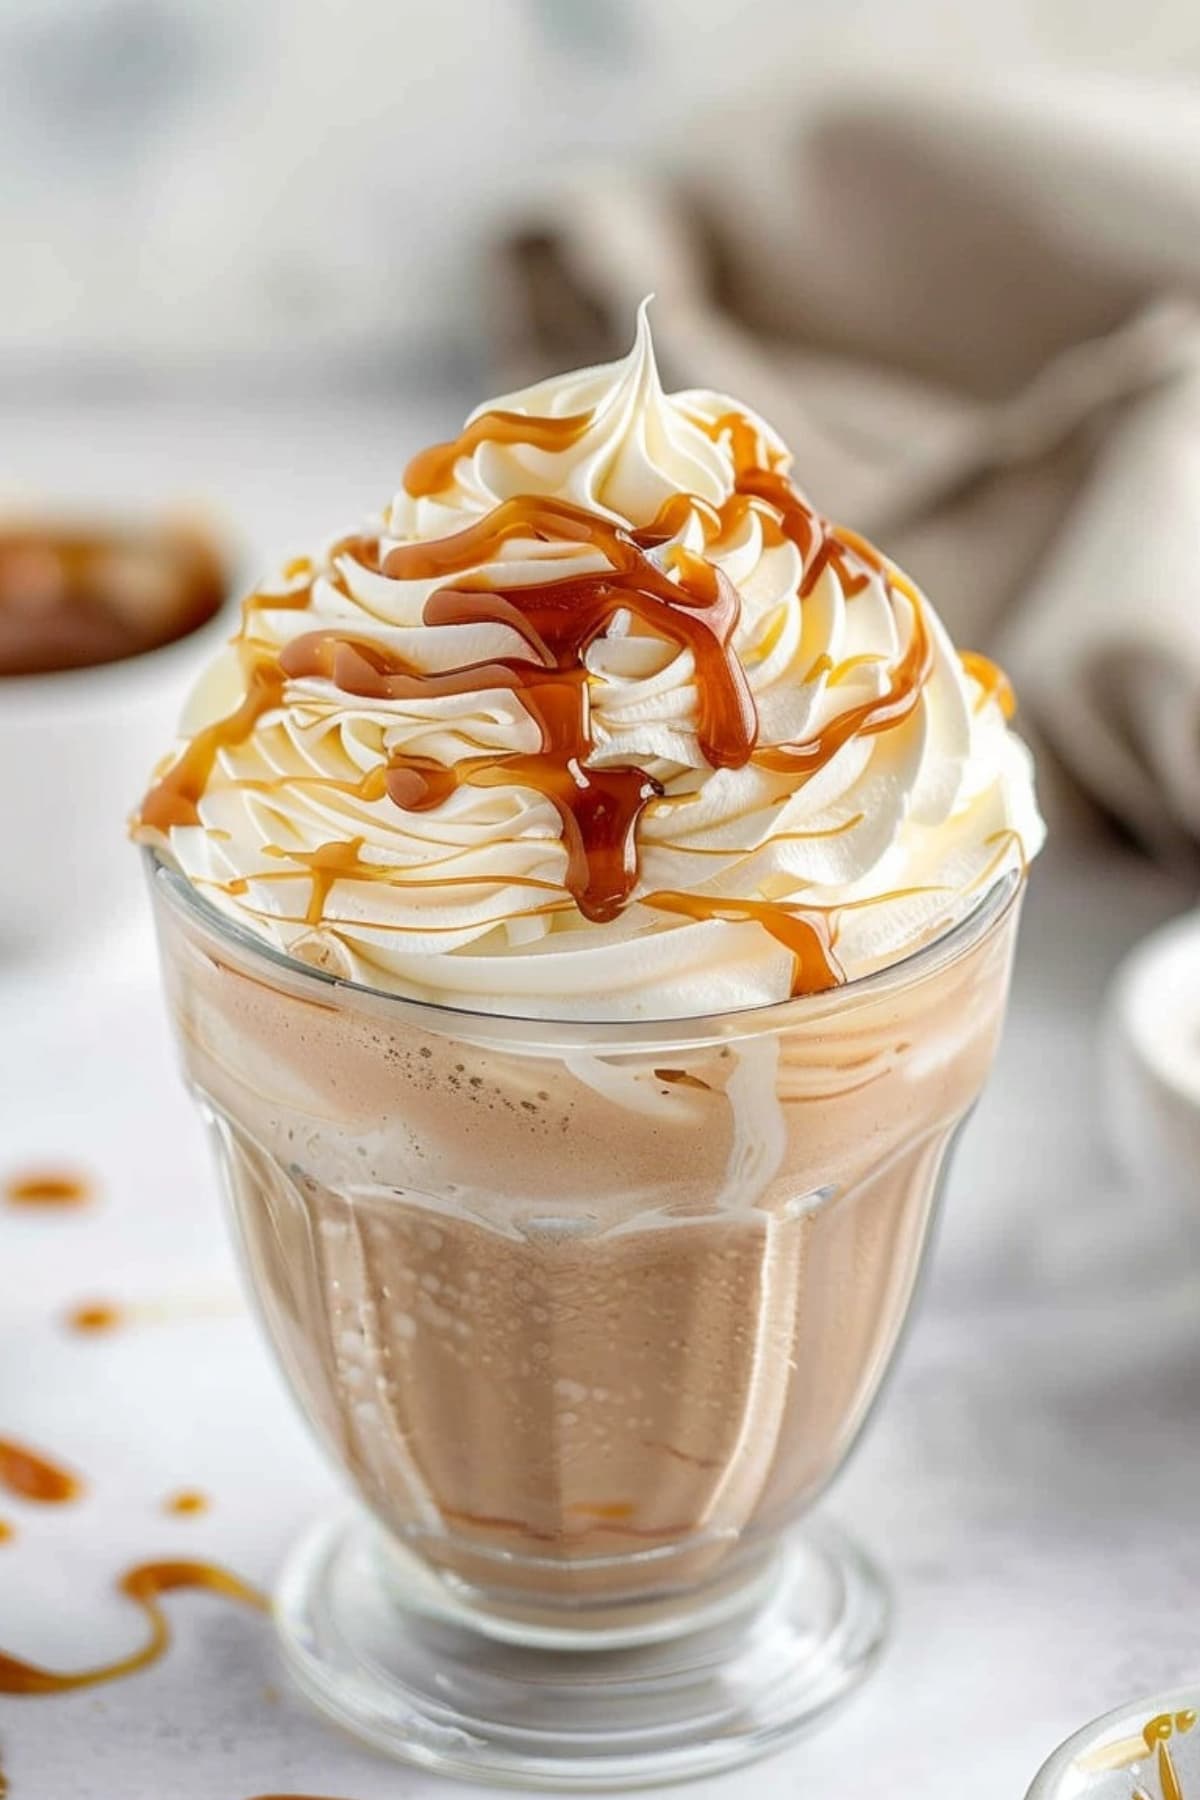 Chocolate milkshake topped with whipped cream drizzled with caramel syrup.